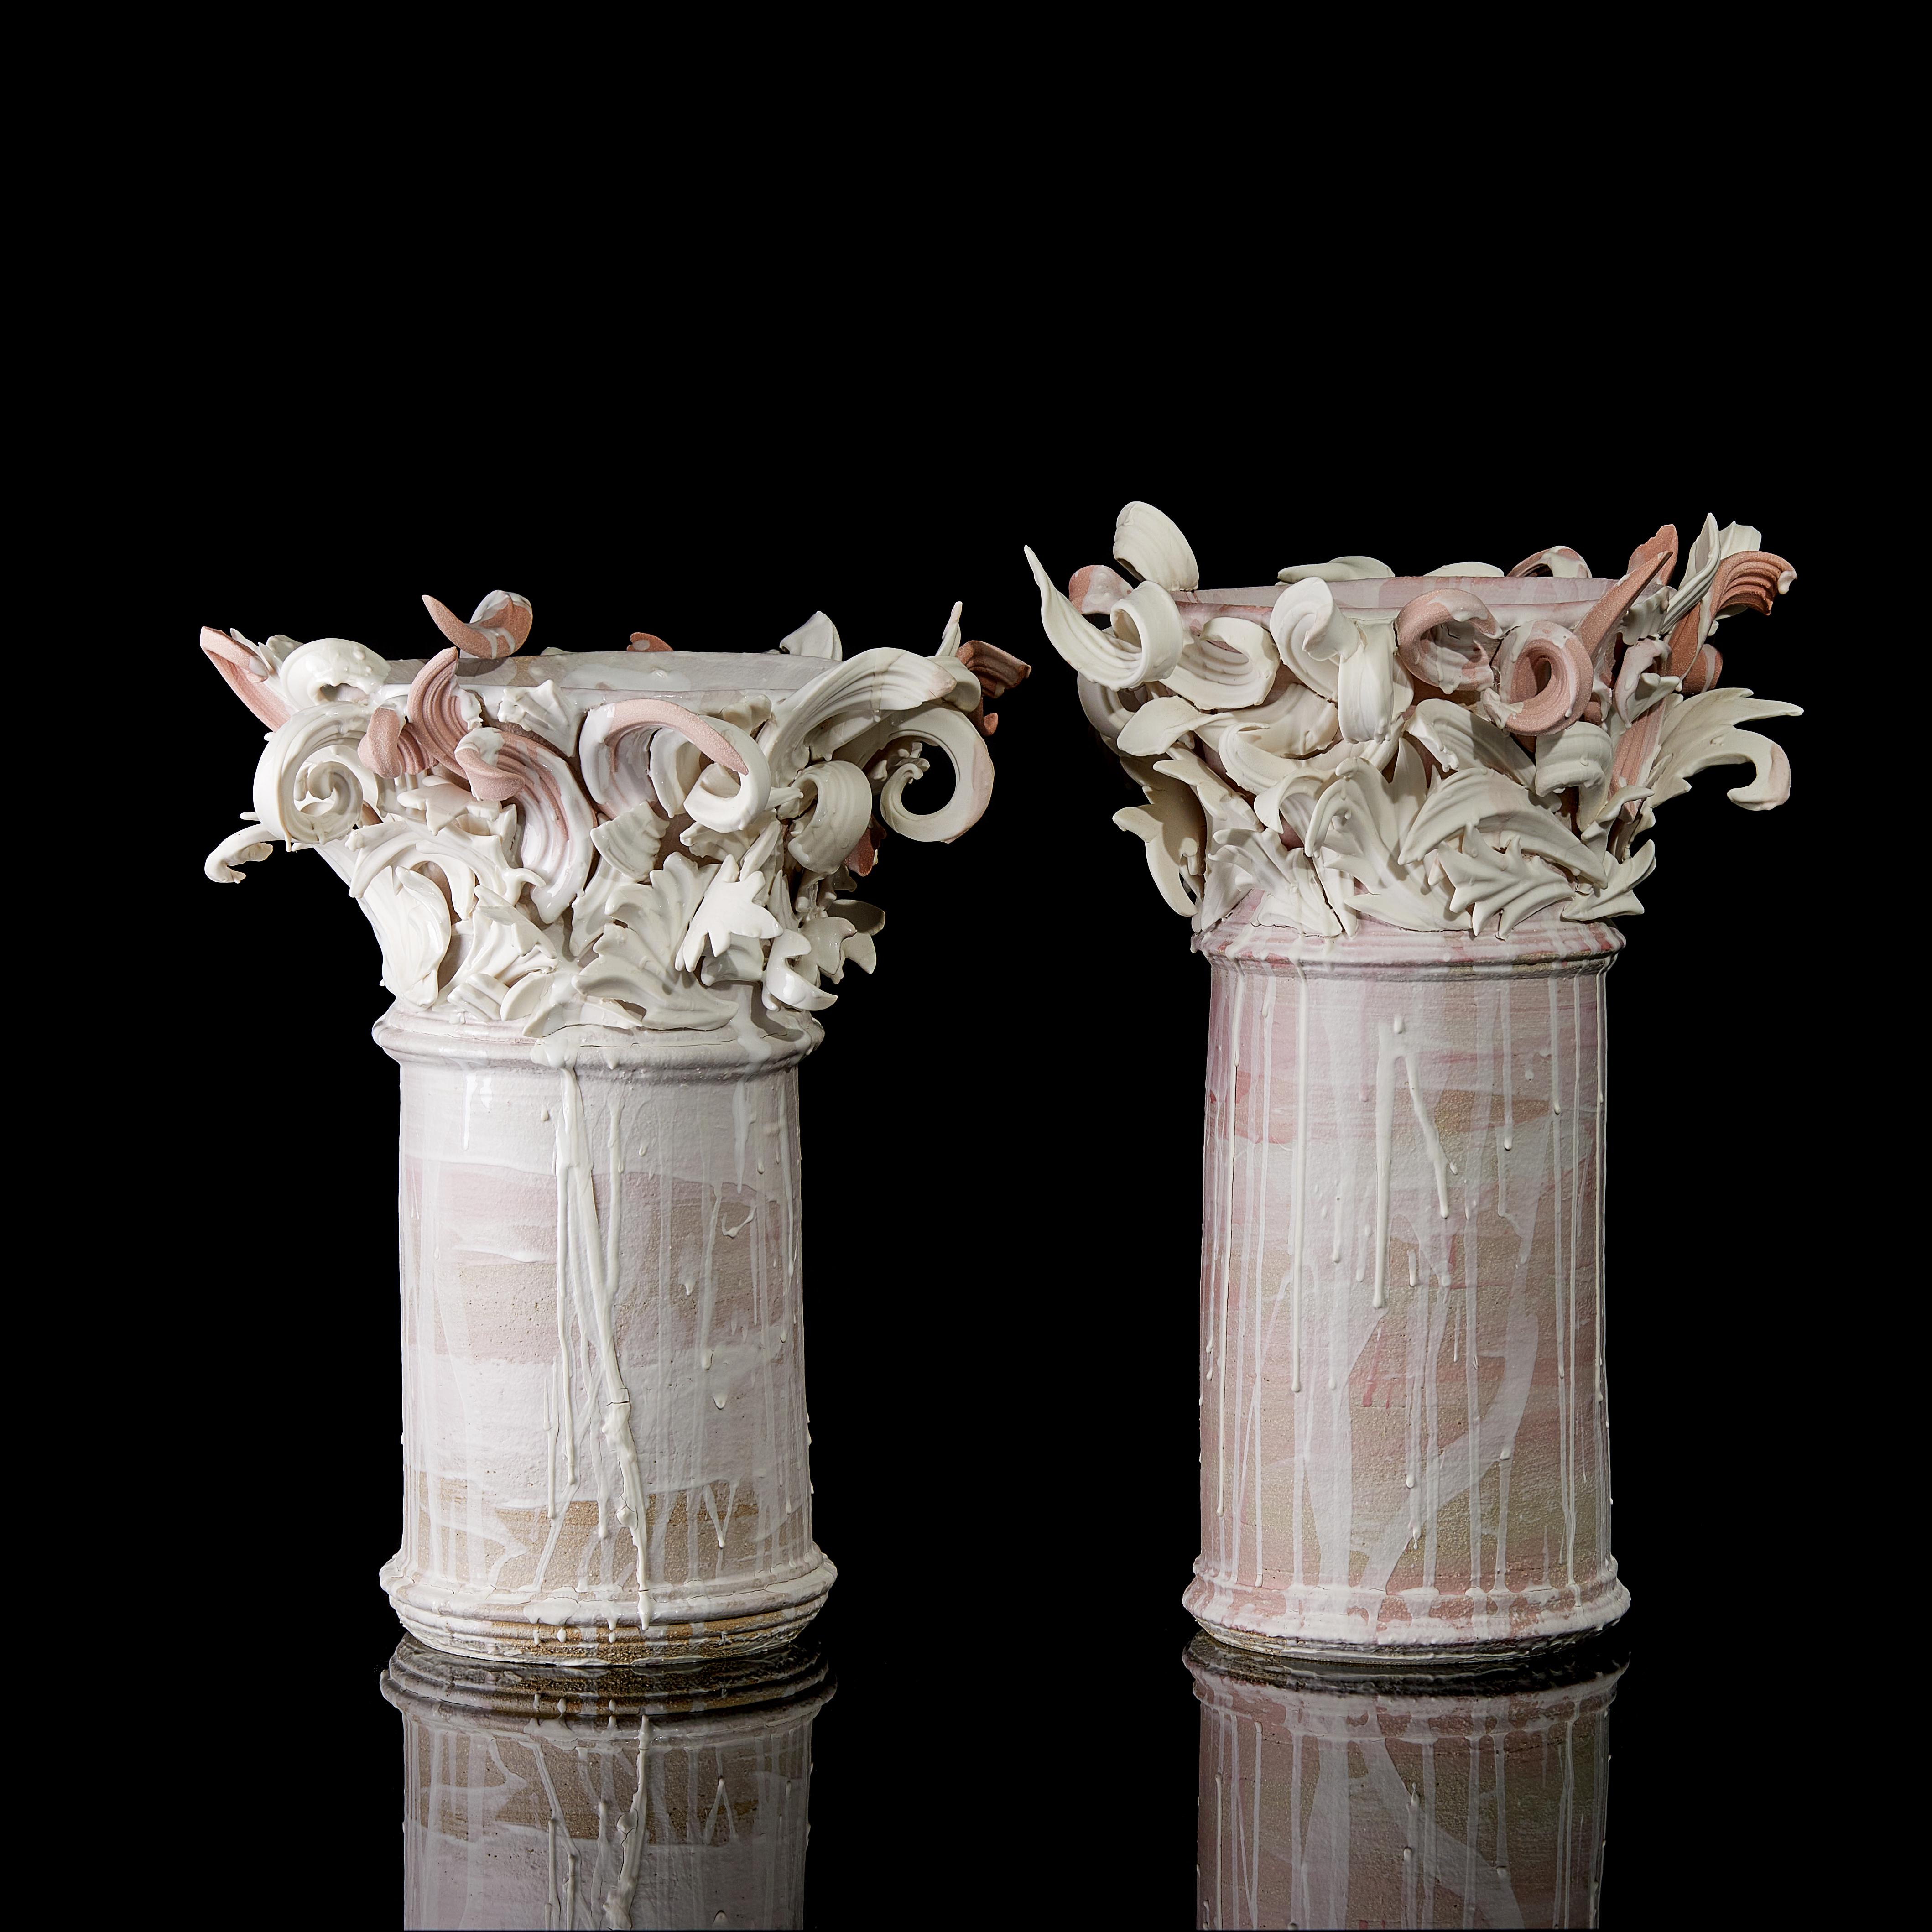 Colonnade II, a Unique Ceramic Sculptural Vase in Pink & White by Jo Taylor 7